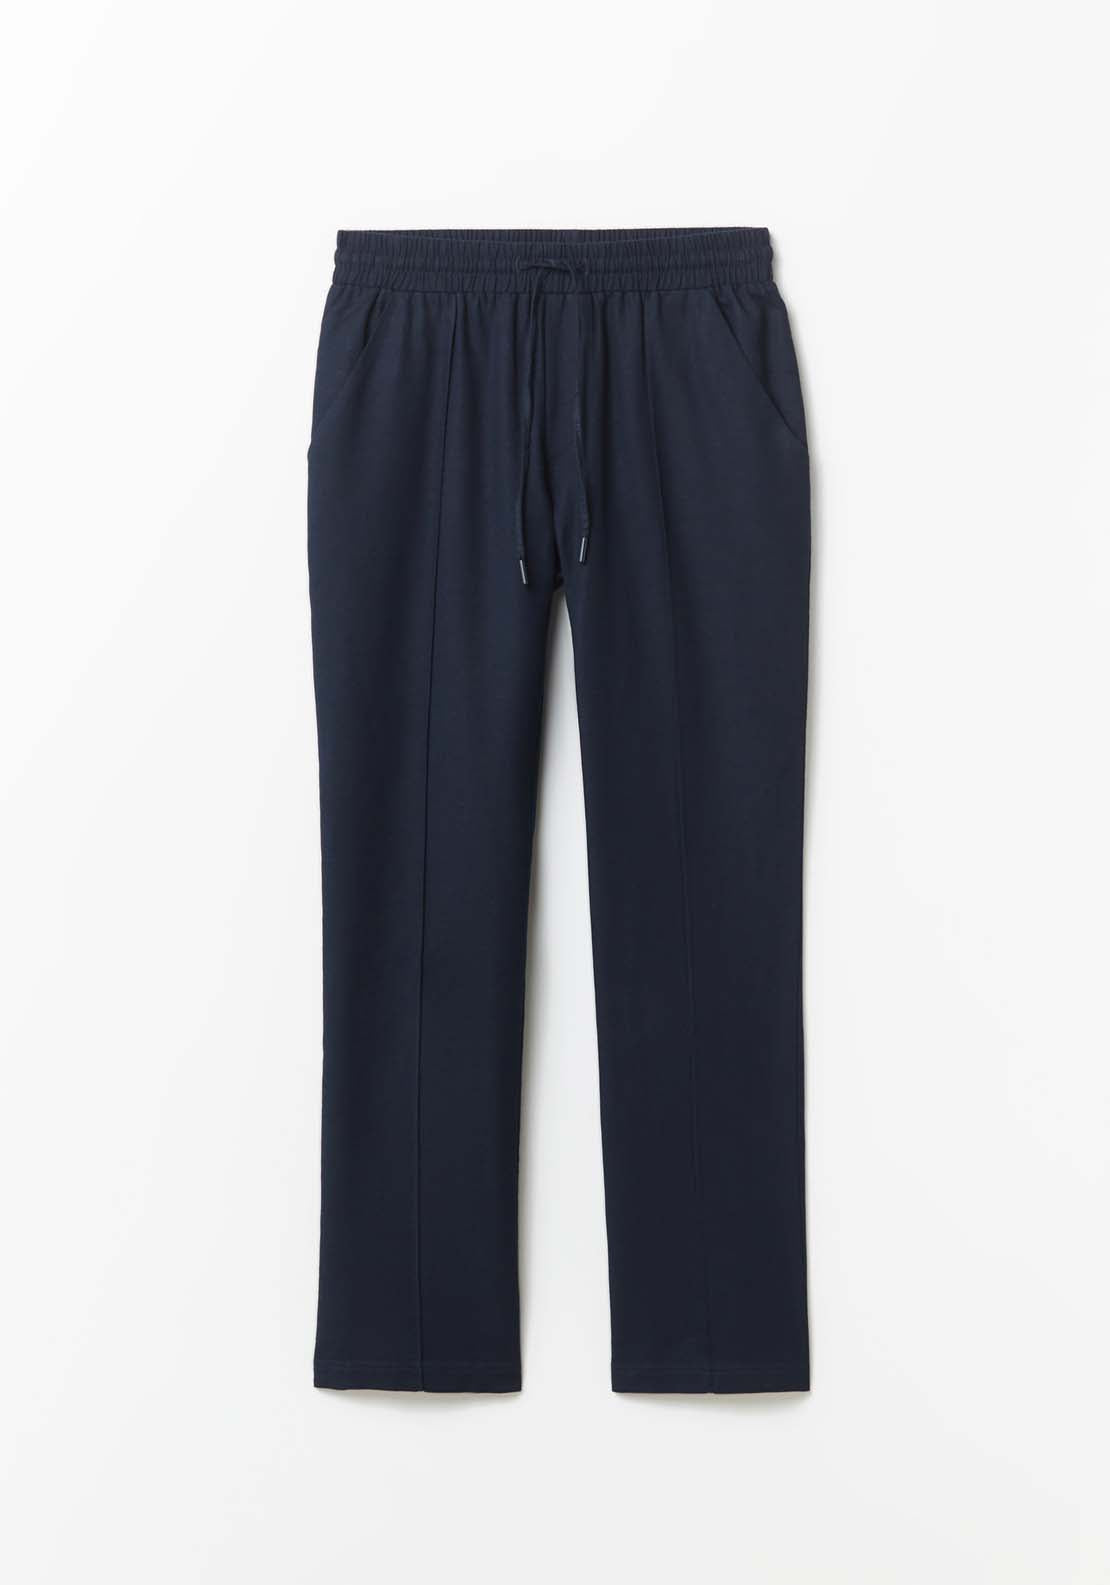 Sfera Loose-fit linen trousers 5 Shaws Department Stores